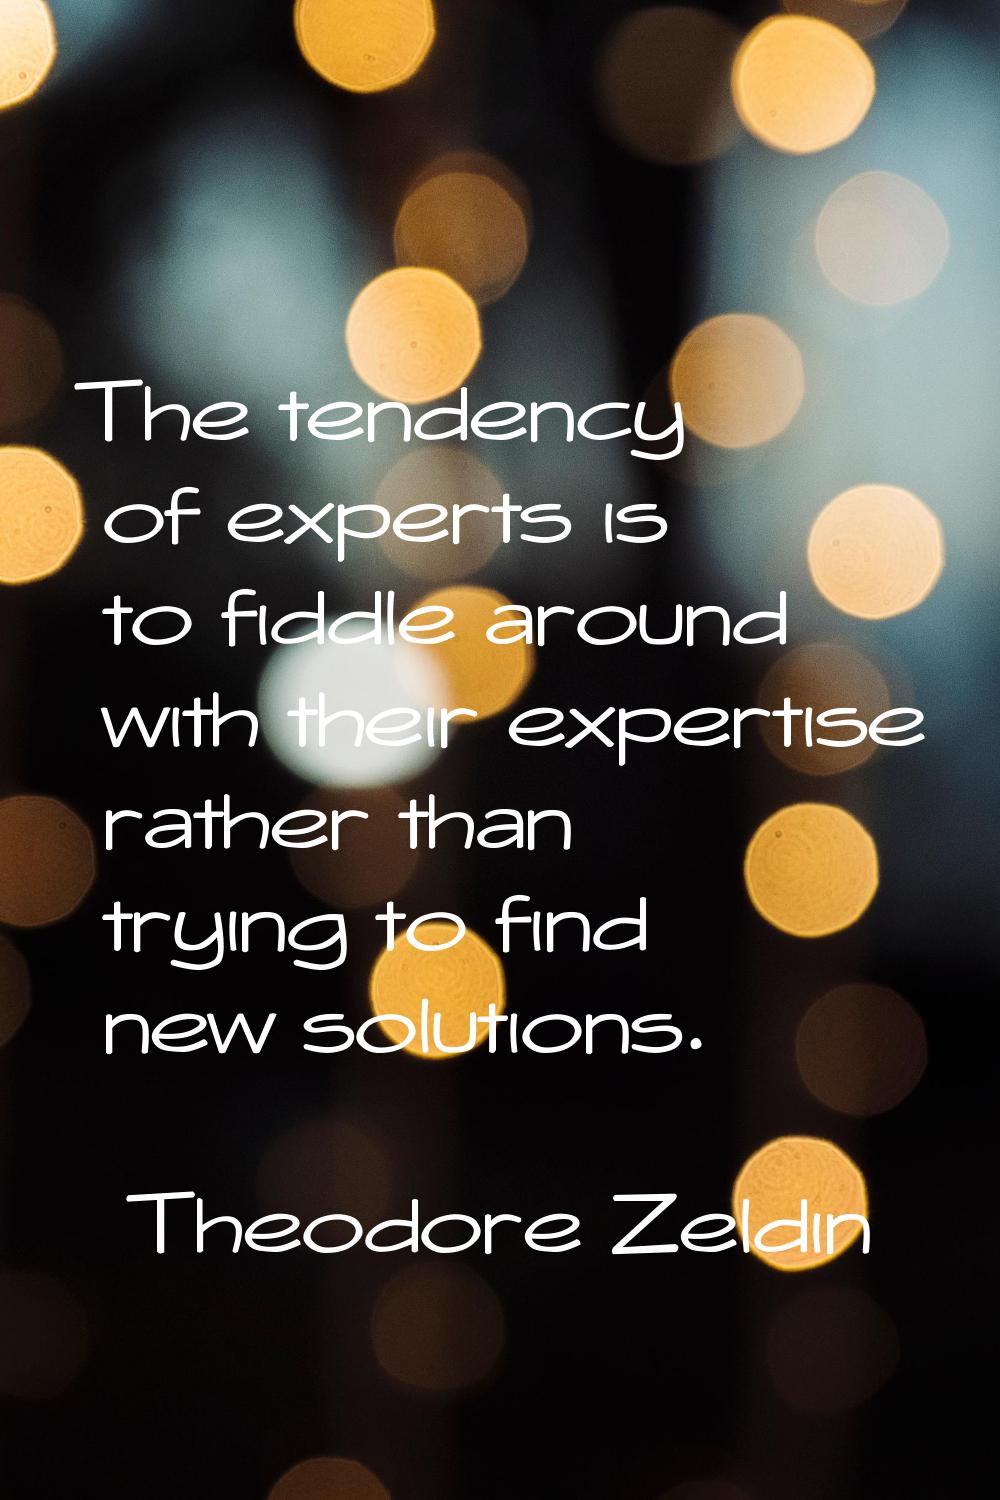 The tendency of experts is to fiddle around with their expertise rather than trying to find new sol